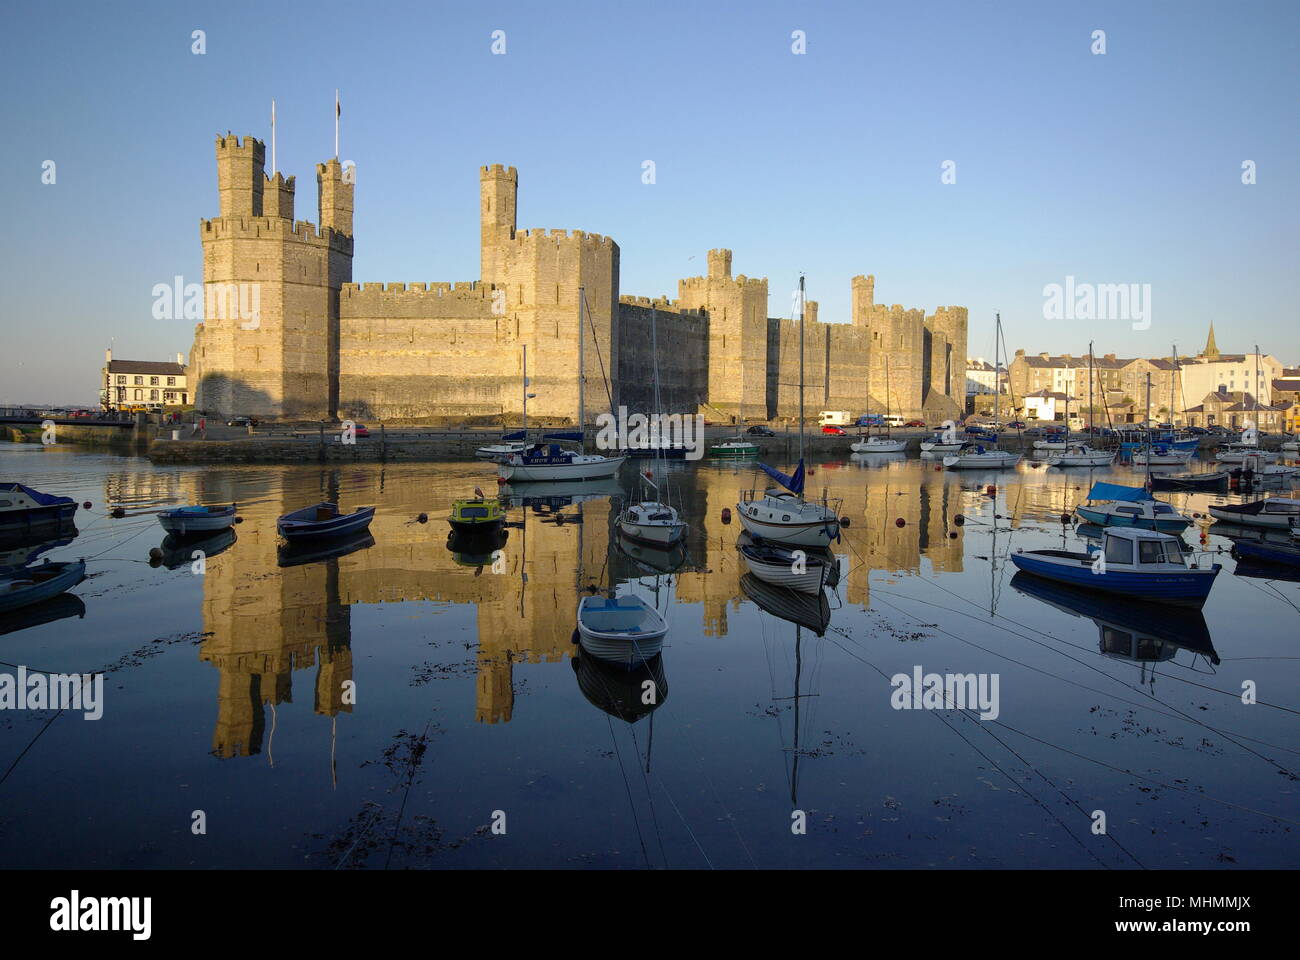 An impressive view of Caernarfon (Caernarvon) Castle in Gwynedd, North Wales, with numerous boats on the water in the foreground.  The castle was built by the English King Edward I from around 1283, on the site of a Roman fortress and Norman motte. Stock Photo